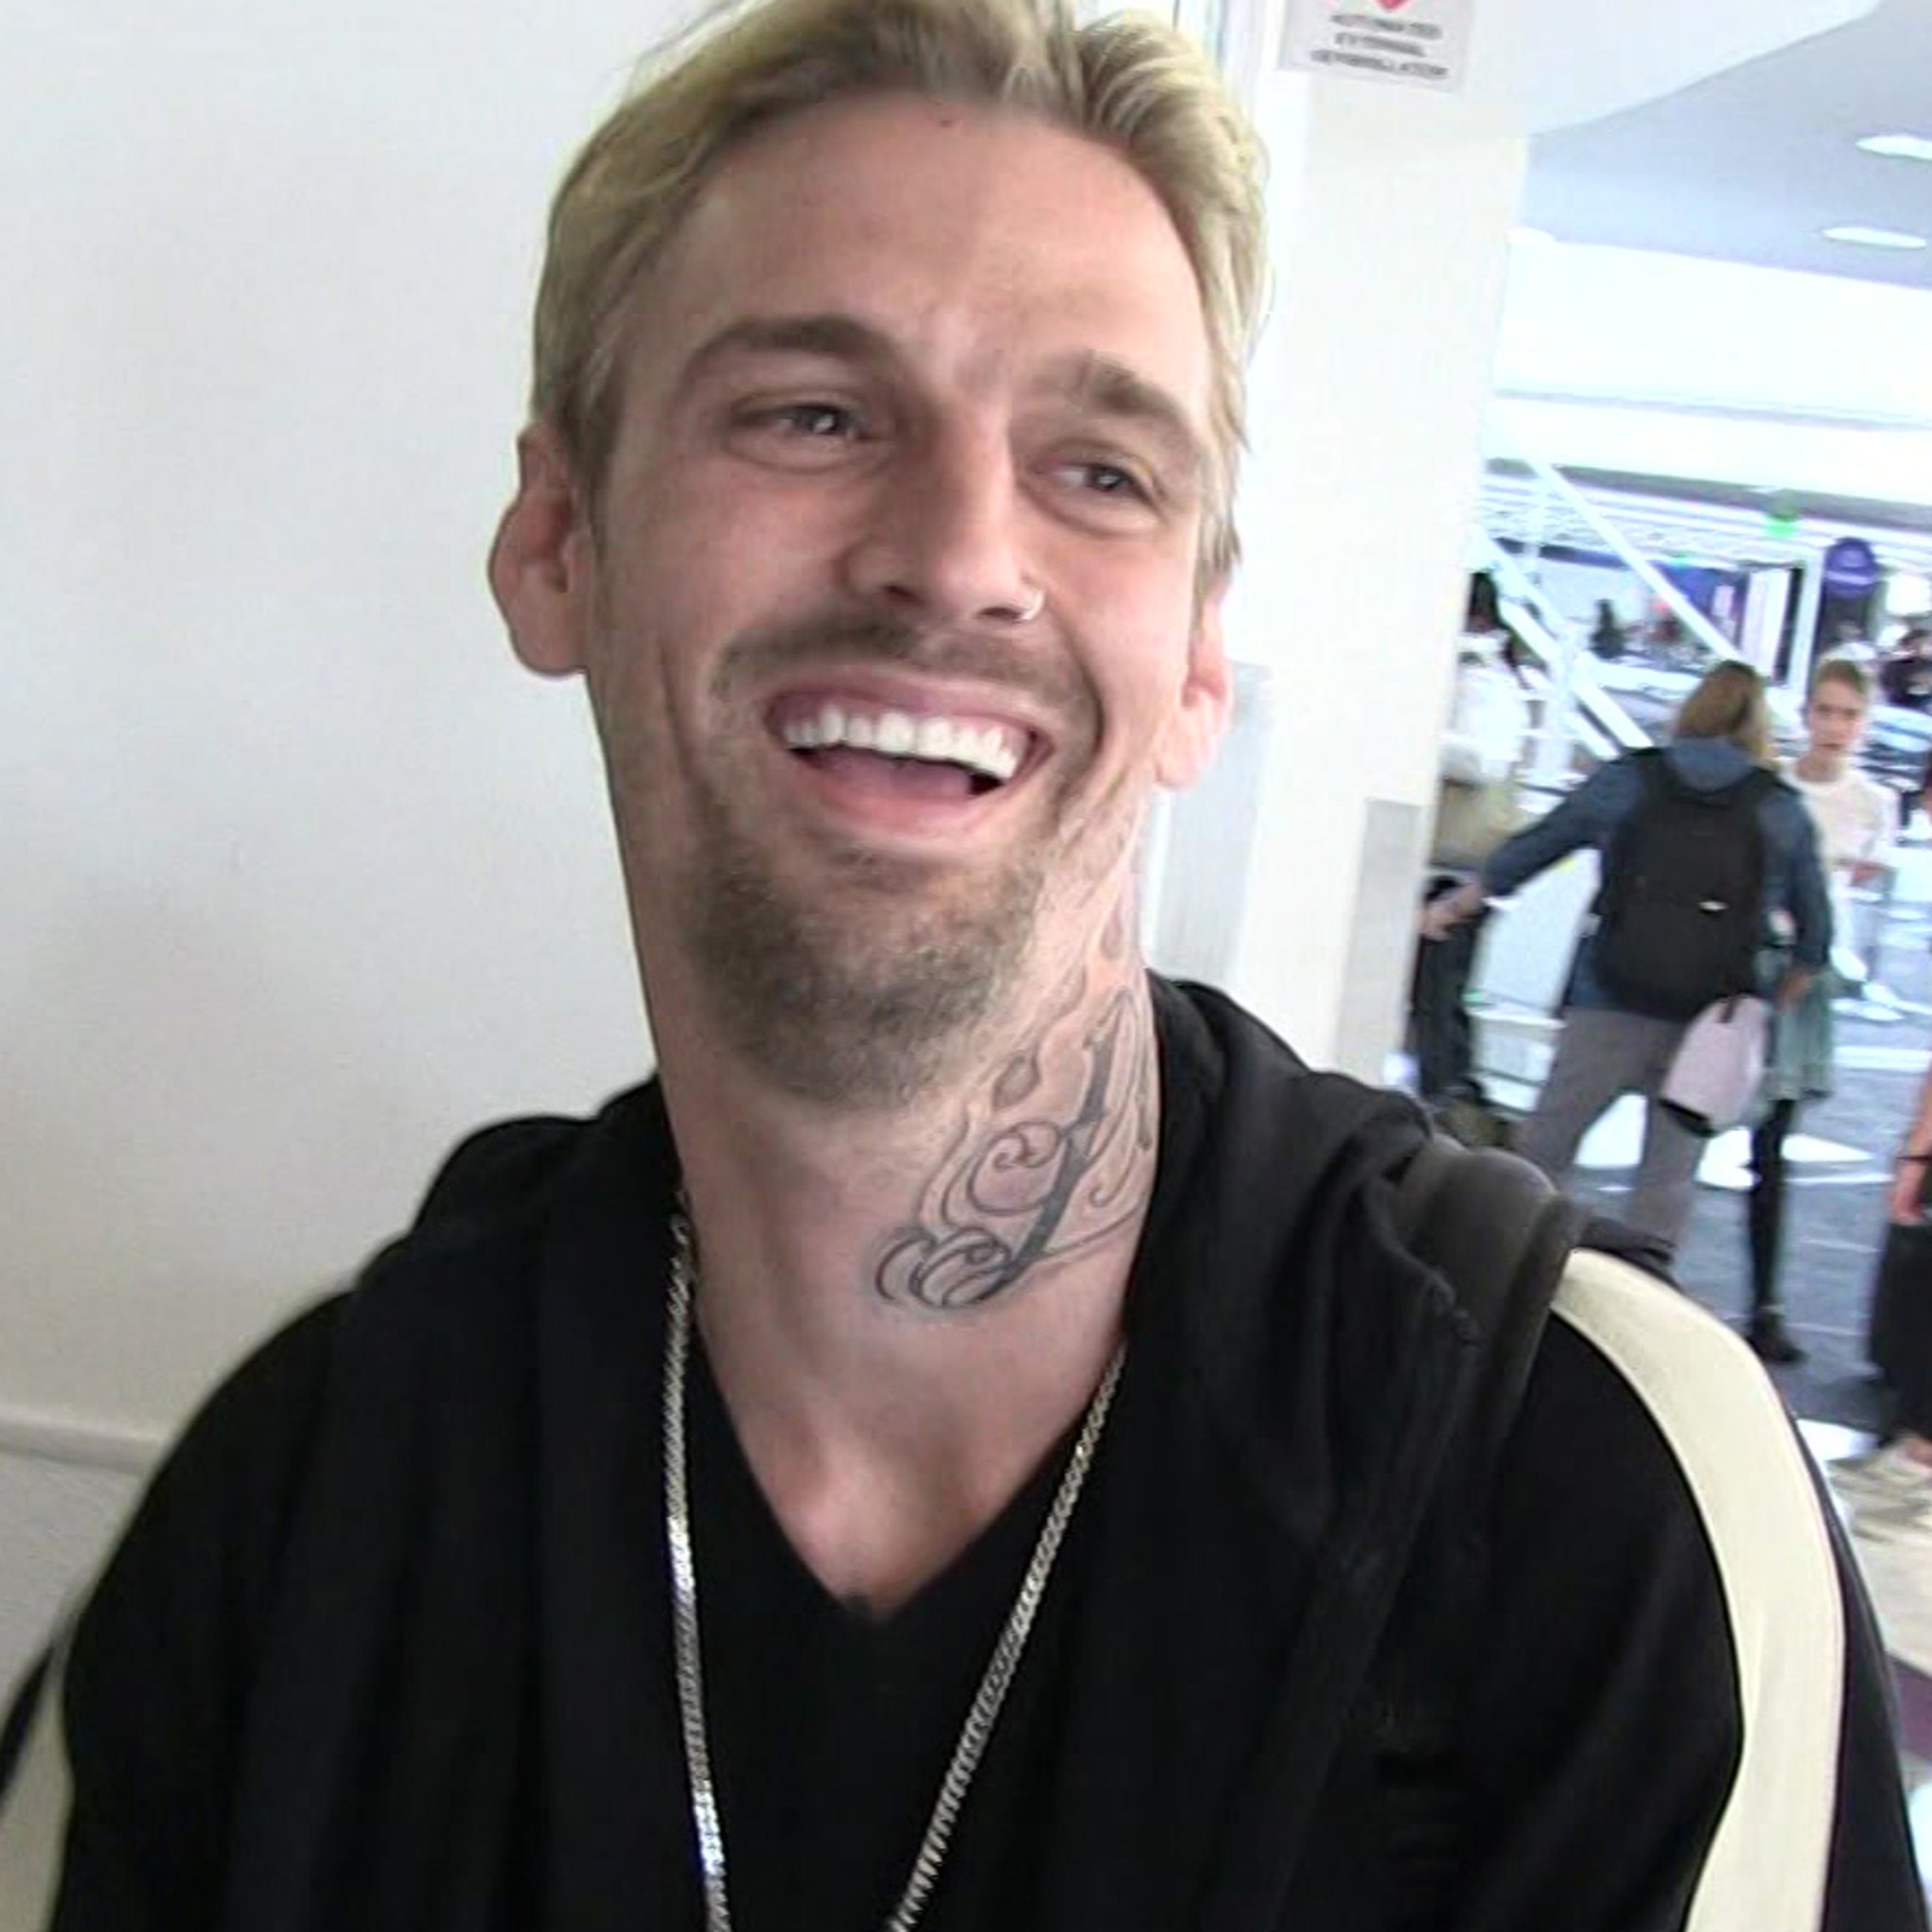 Aaron Carter leaves fans gobsmacked as he reveals giant tattoo of Rihanna  on his face  Heart